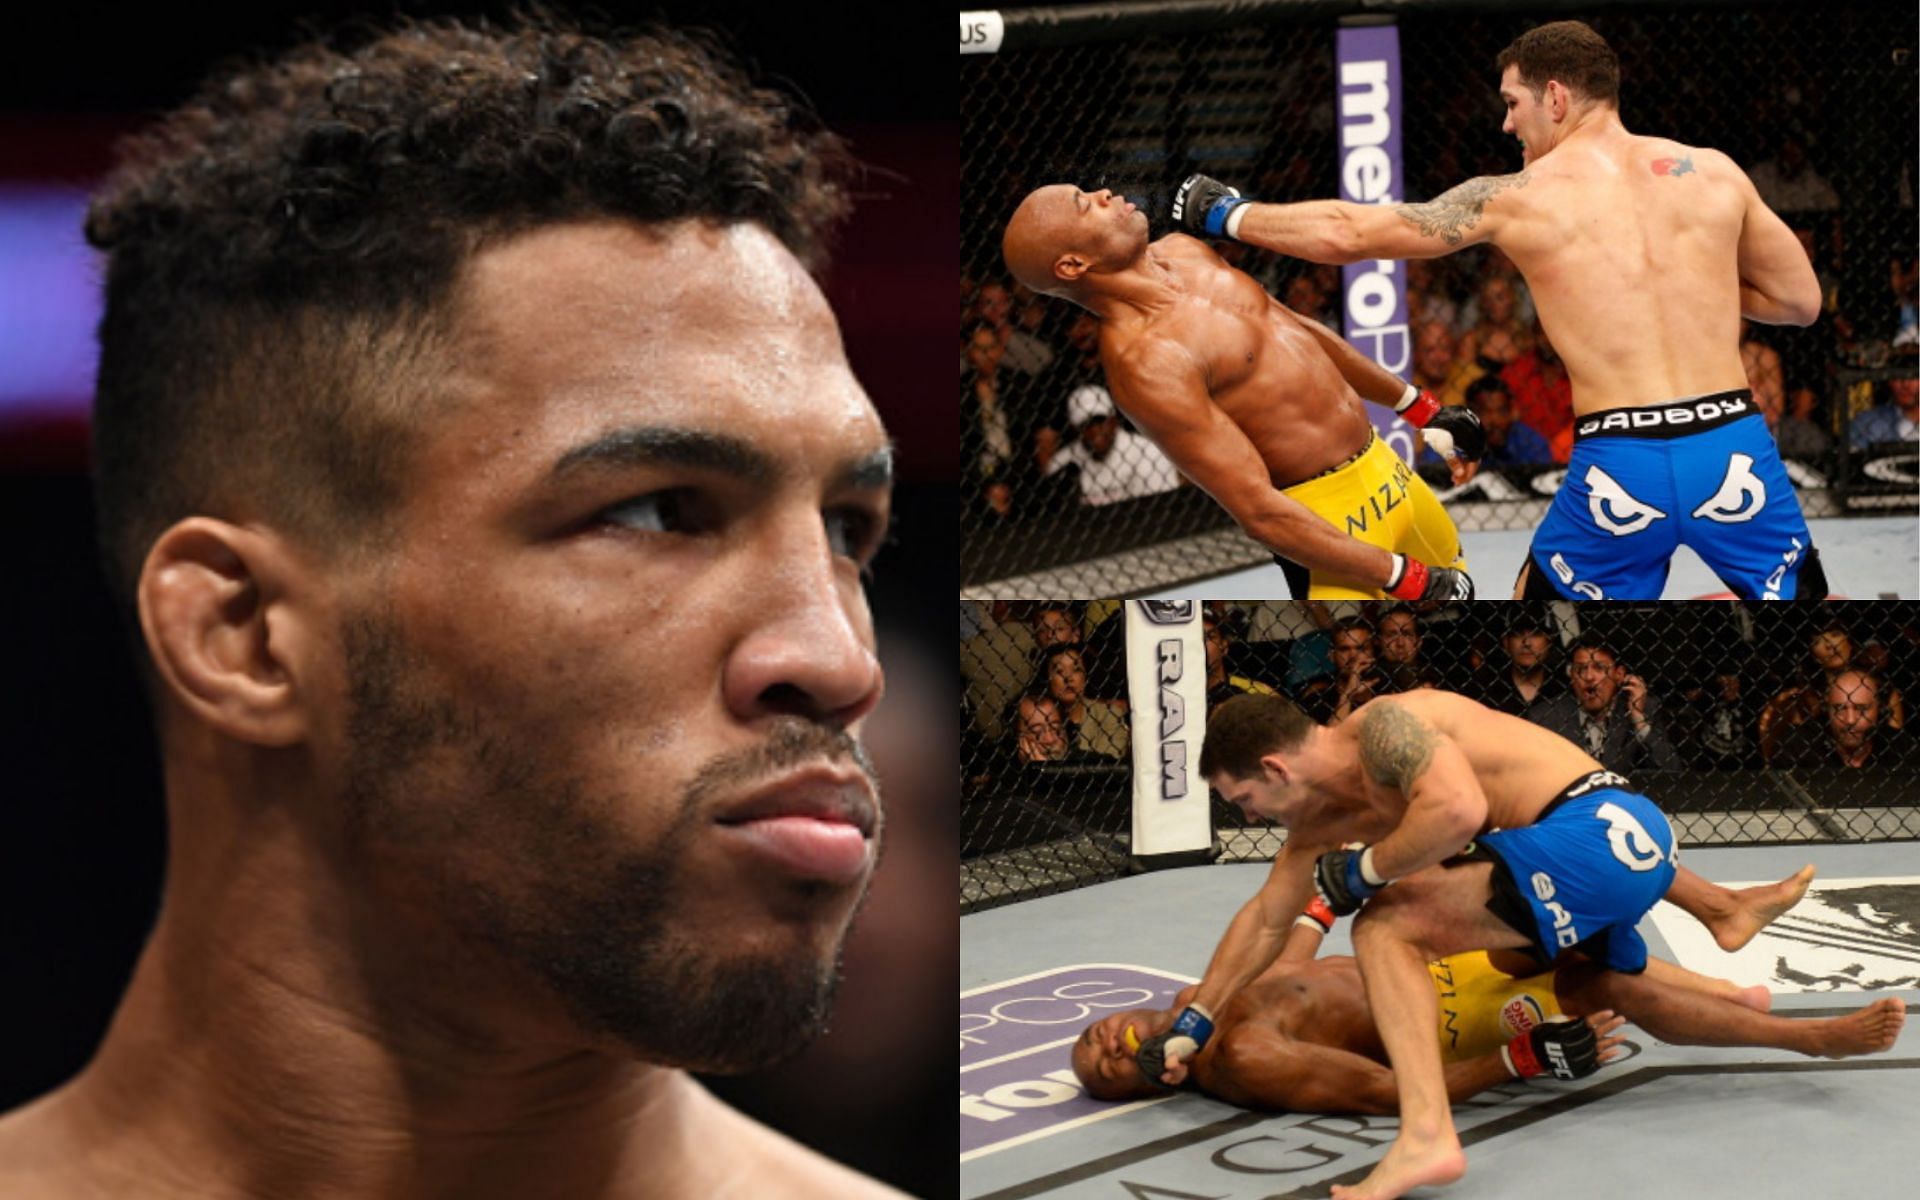 Kevin Lee (left); Silva vs. Weidman at UFC 162 (top and bottom right)